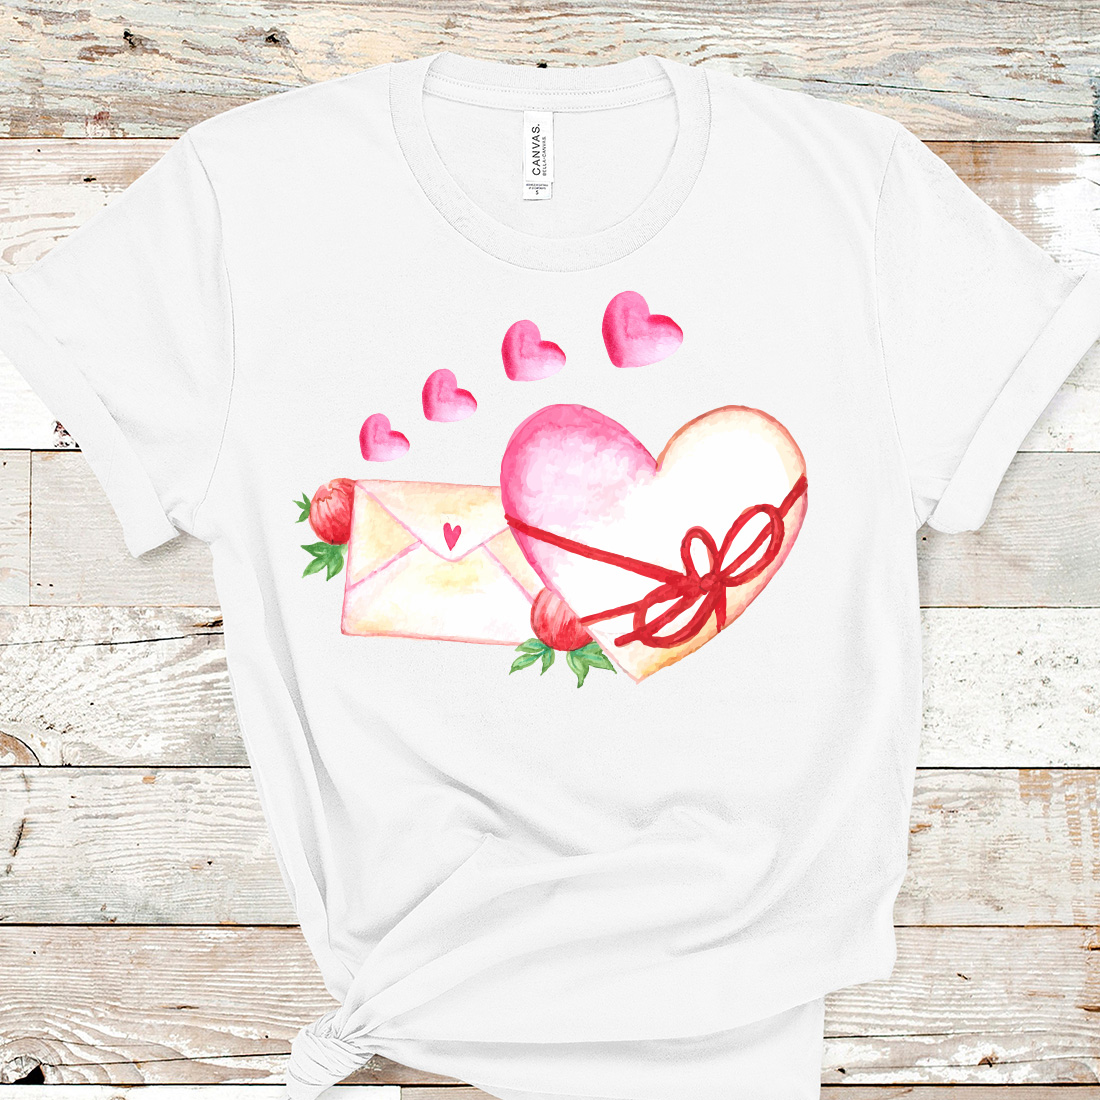 Image of t-shirt with enchanting print of heart and love letter